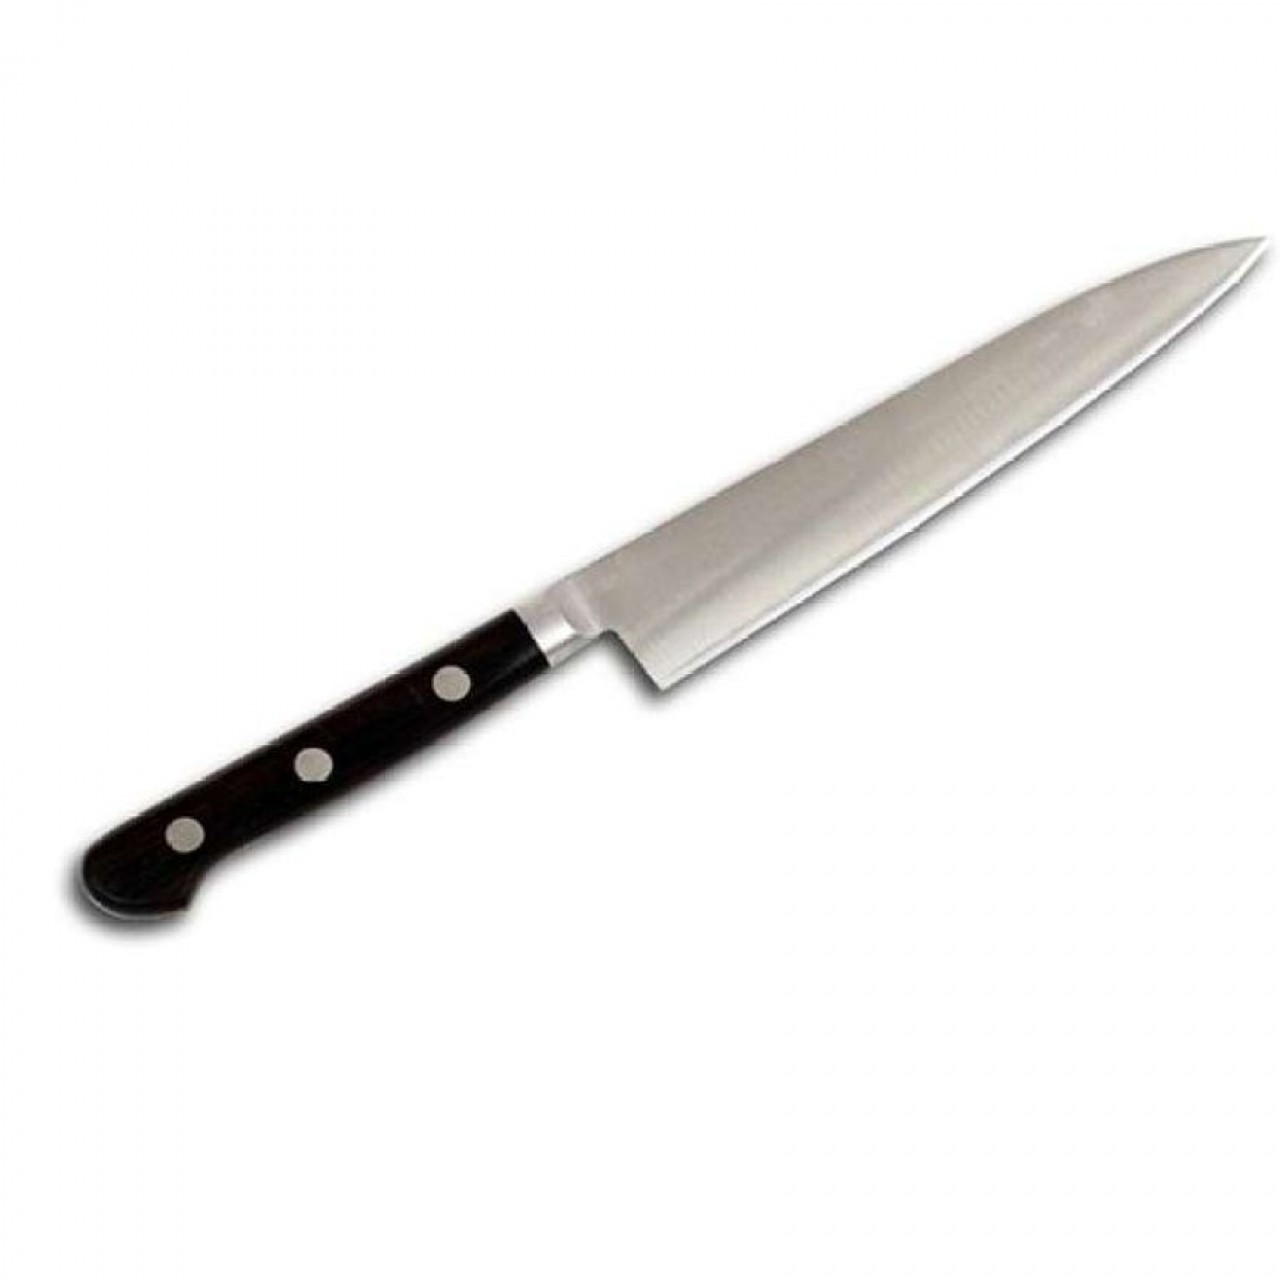 Stainless Steel Knife - 10 Inch